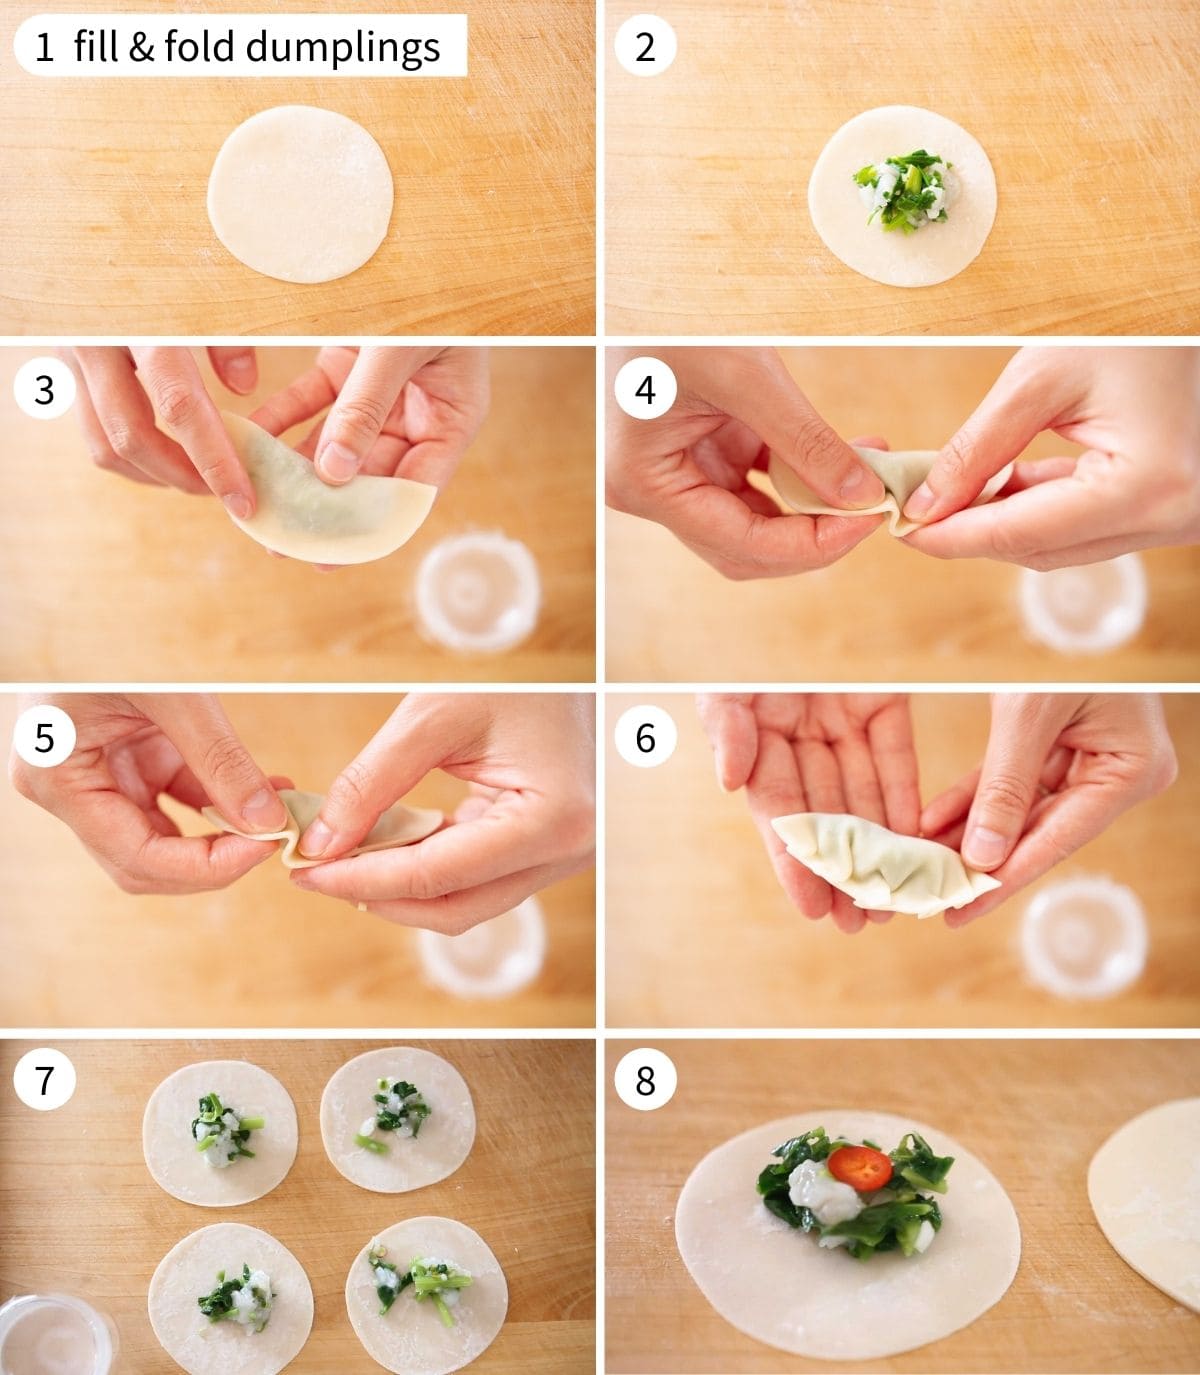 8 step by step photos on how to fill and fold dumplings using pre-made dumpling wrappers.